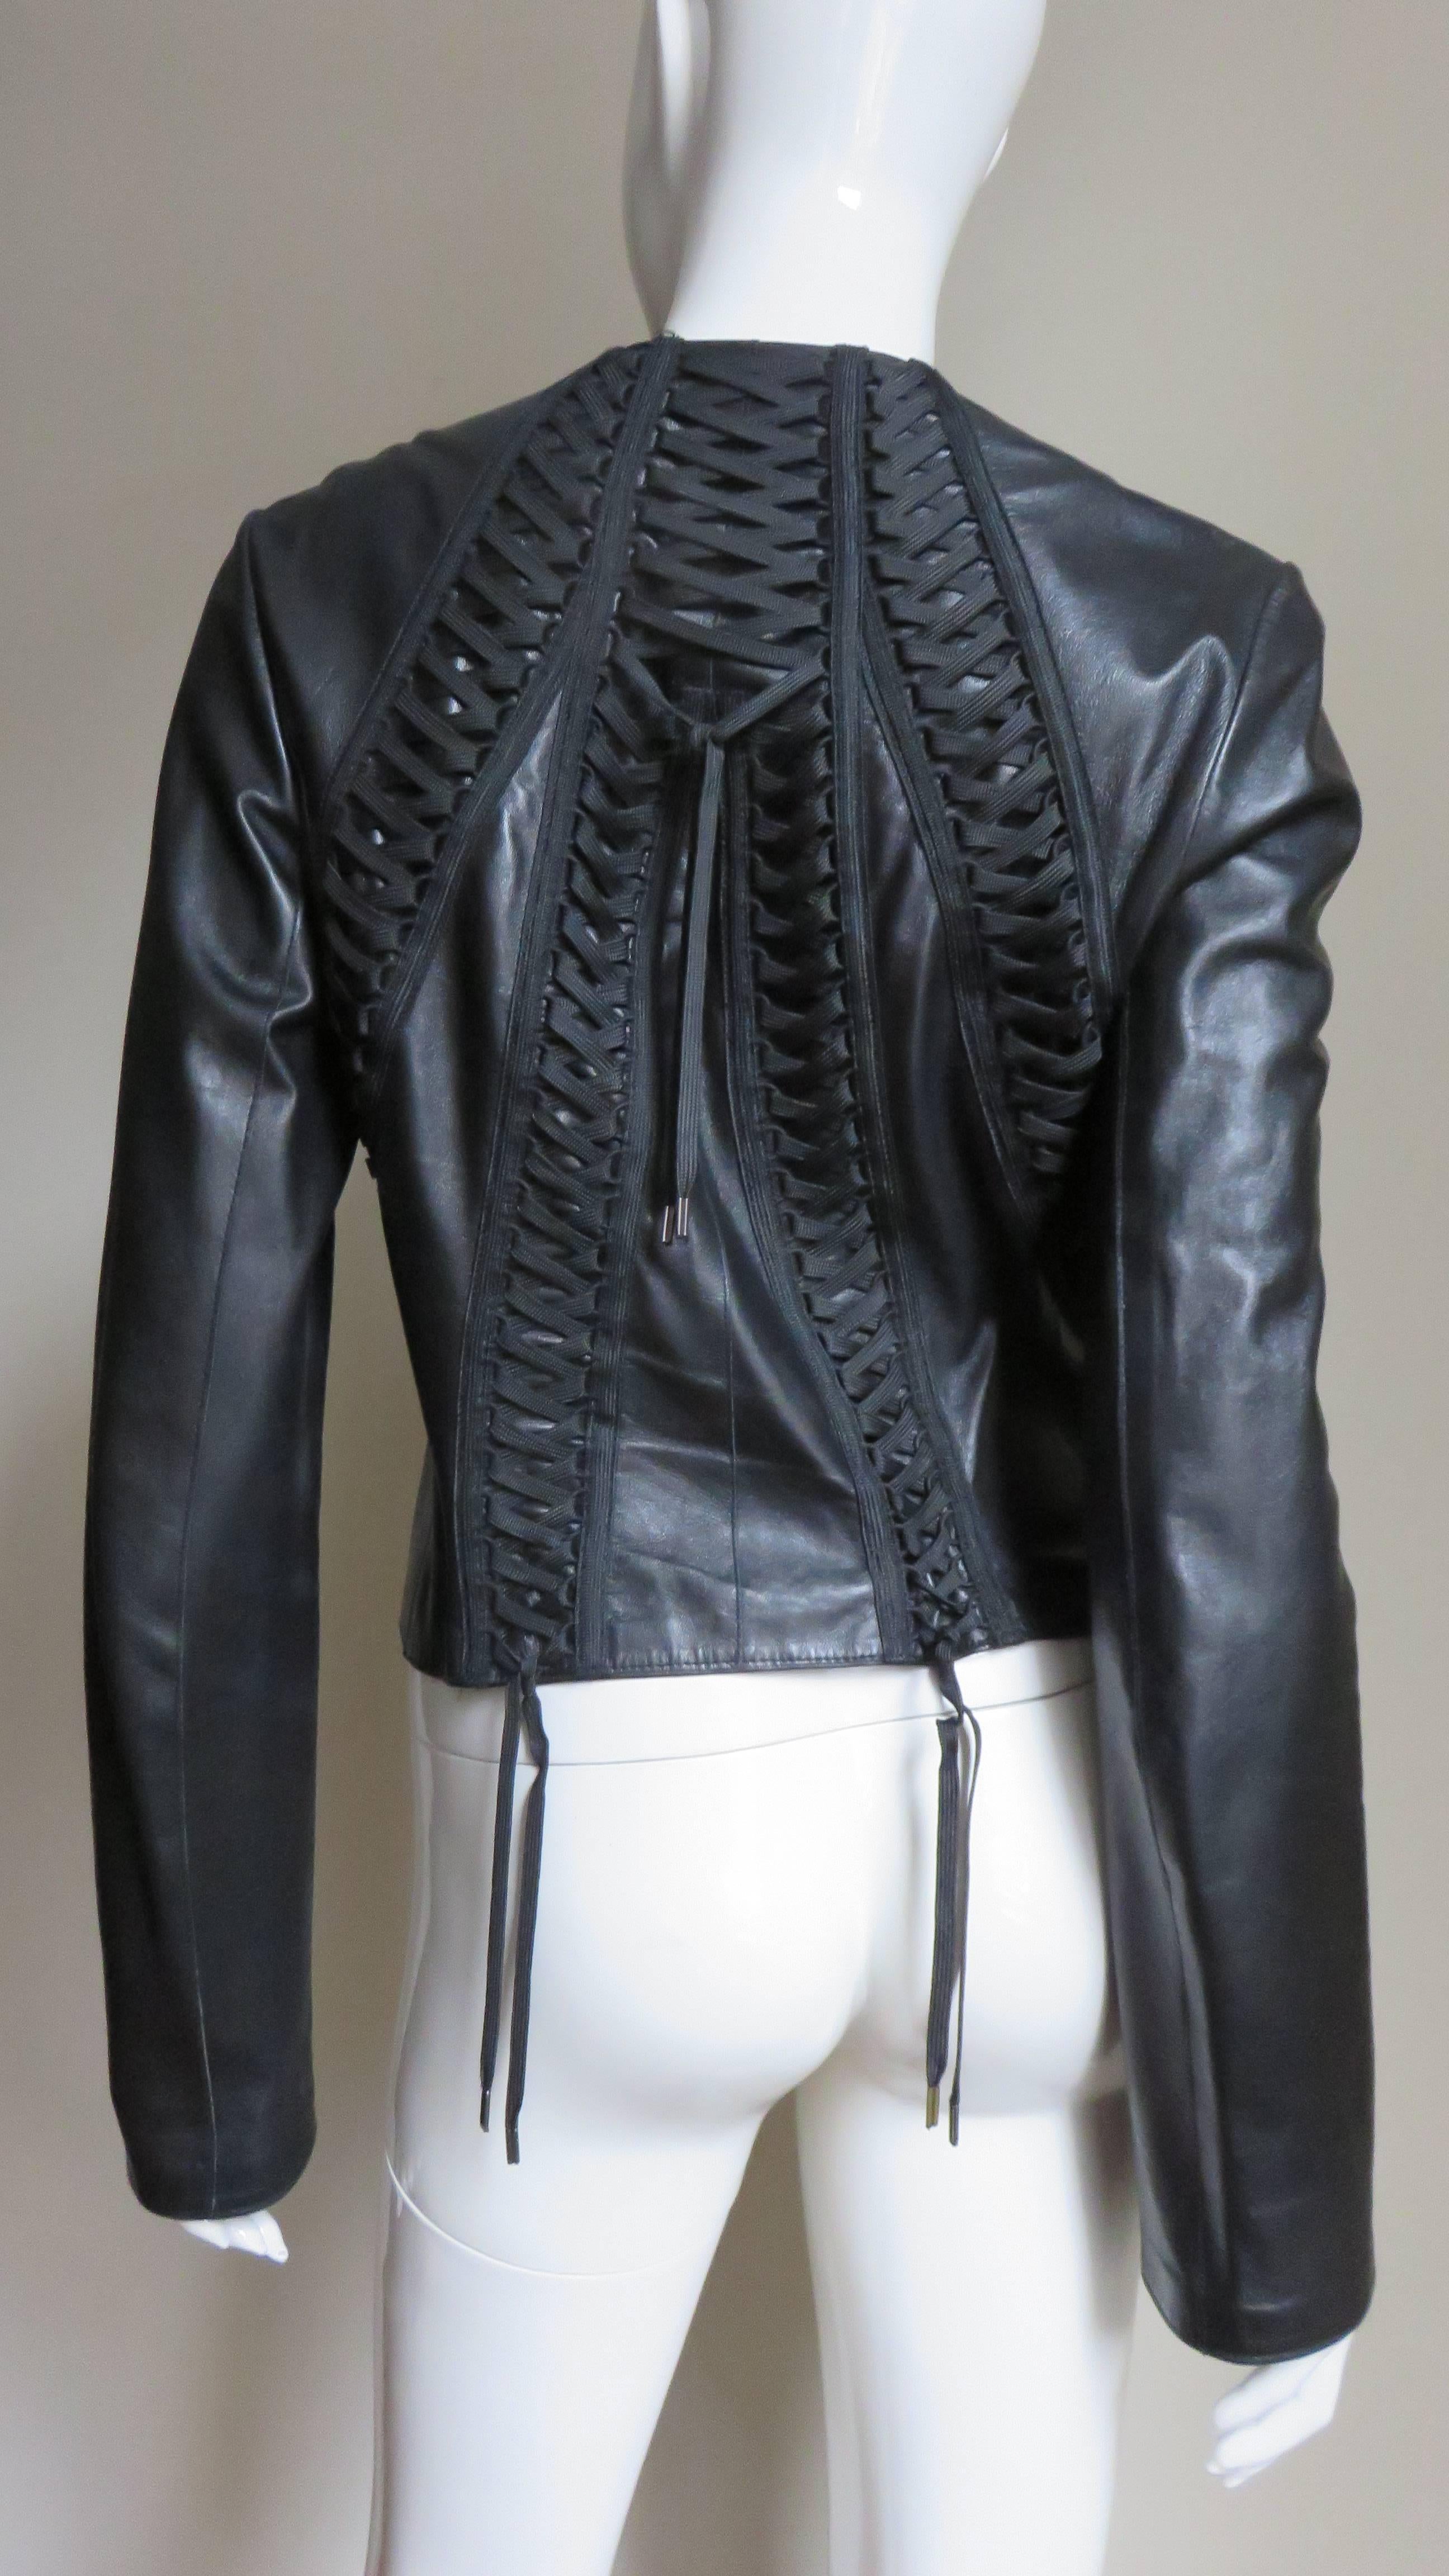 Christian Dior by John Galliano Lace-up Leather Jacket S/S 2002 For Sale 3